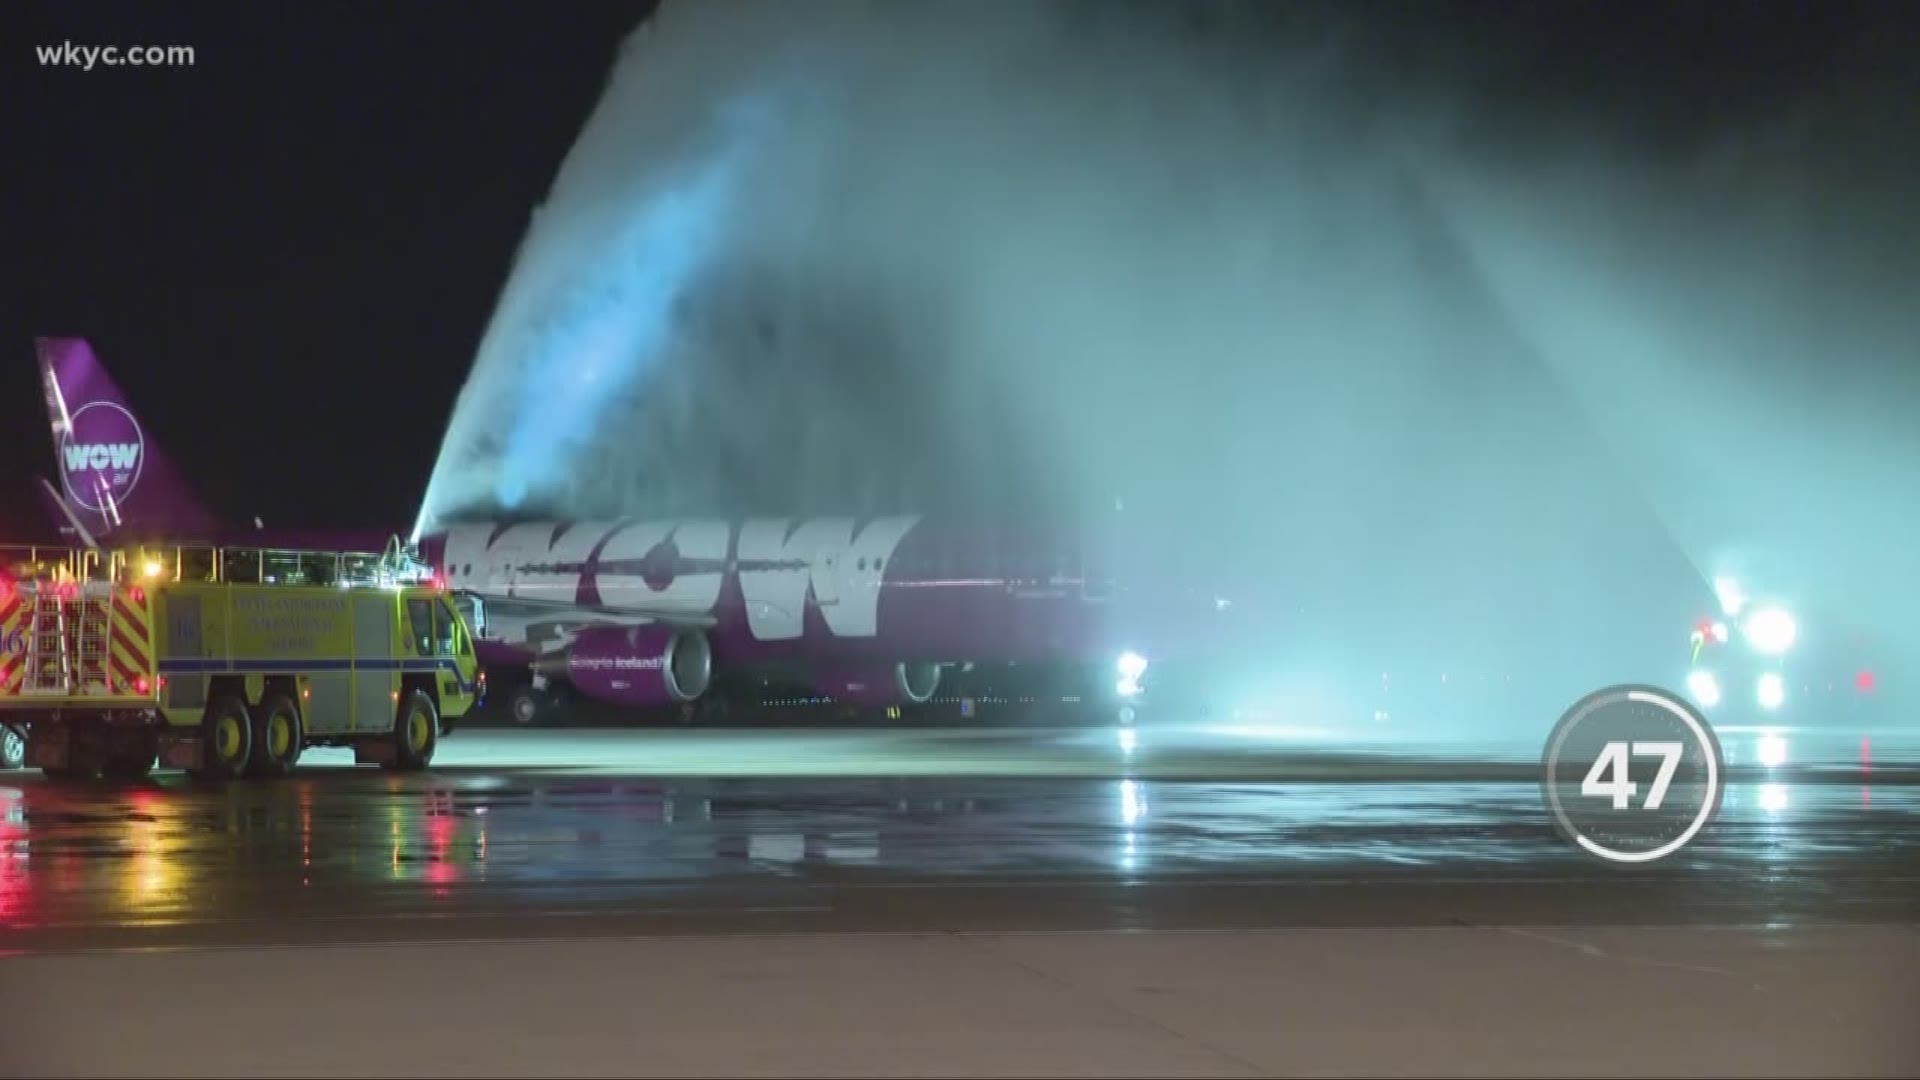 WOW Airlines ends services from Cleveland Hopkins Airport